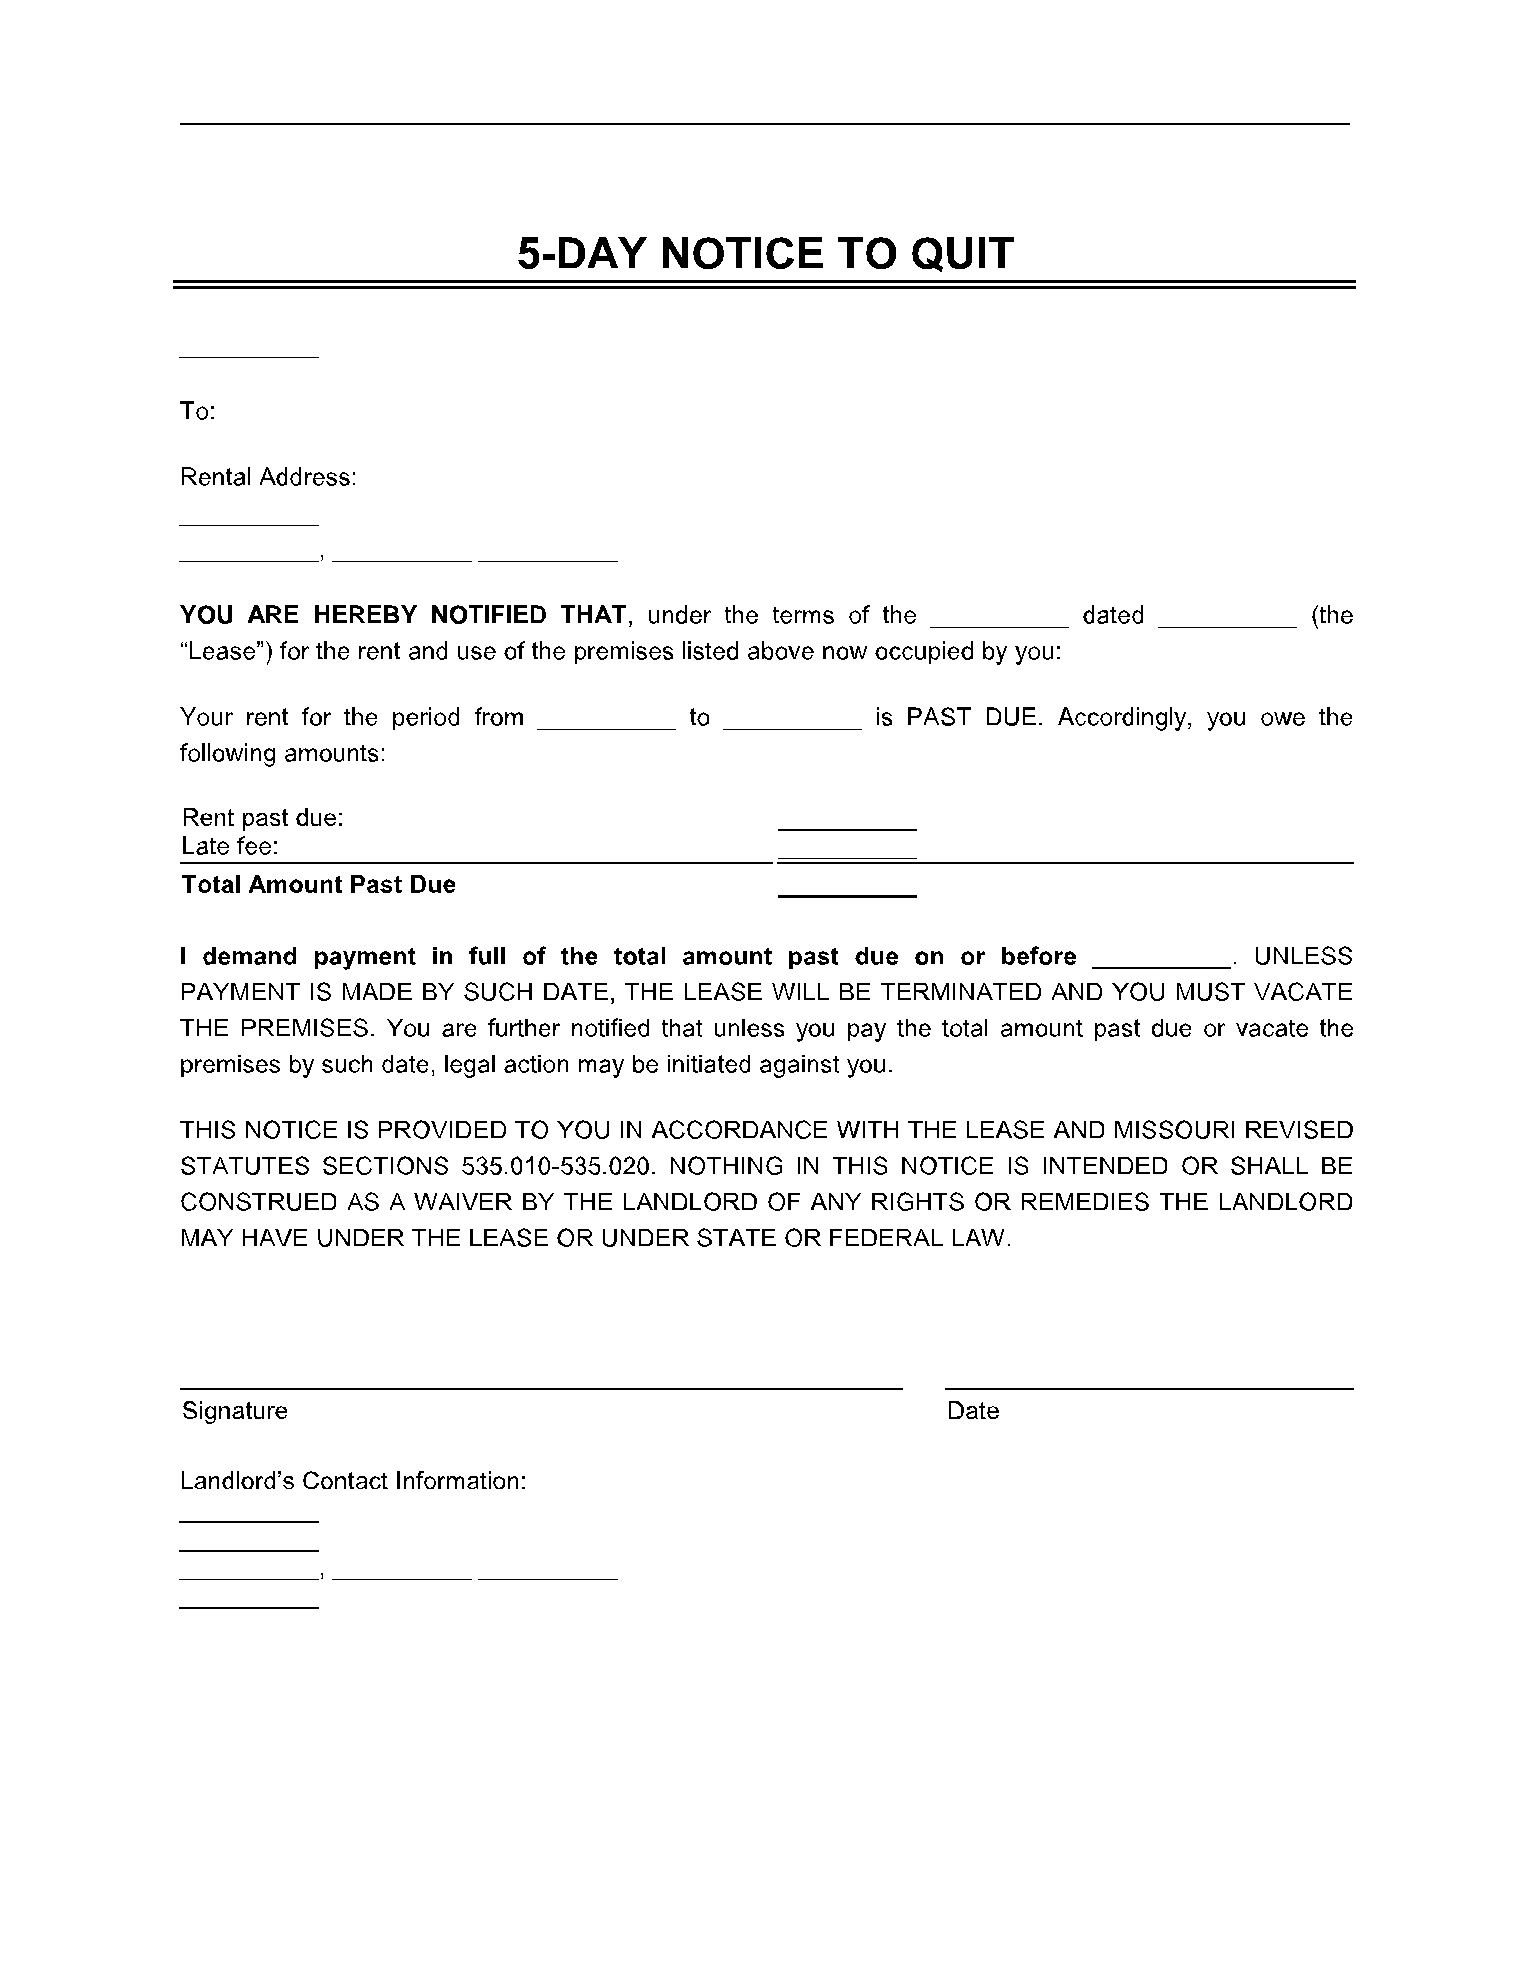 5-Day Eviction Notice Template